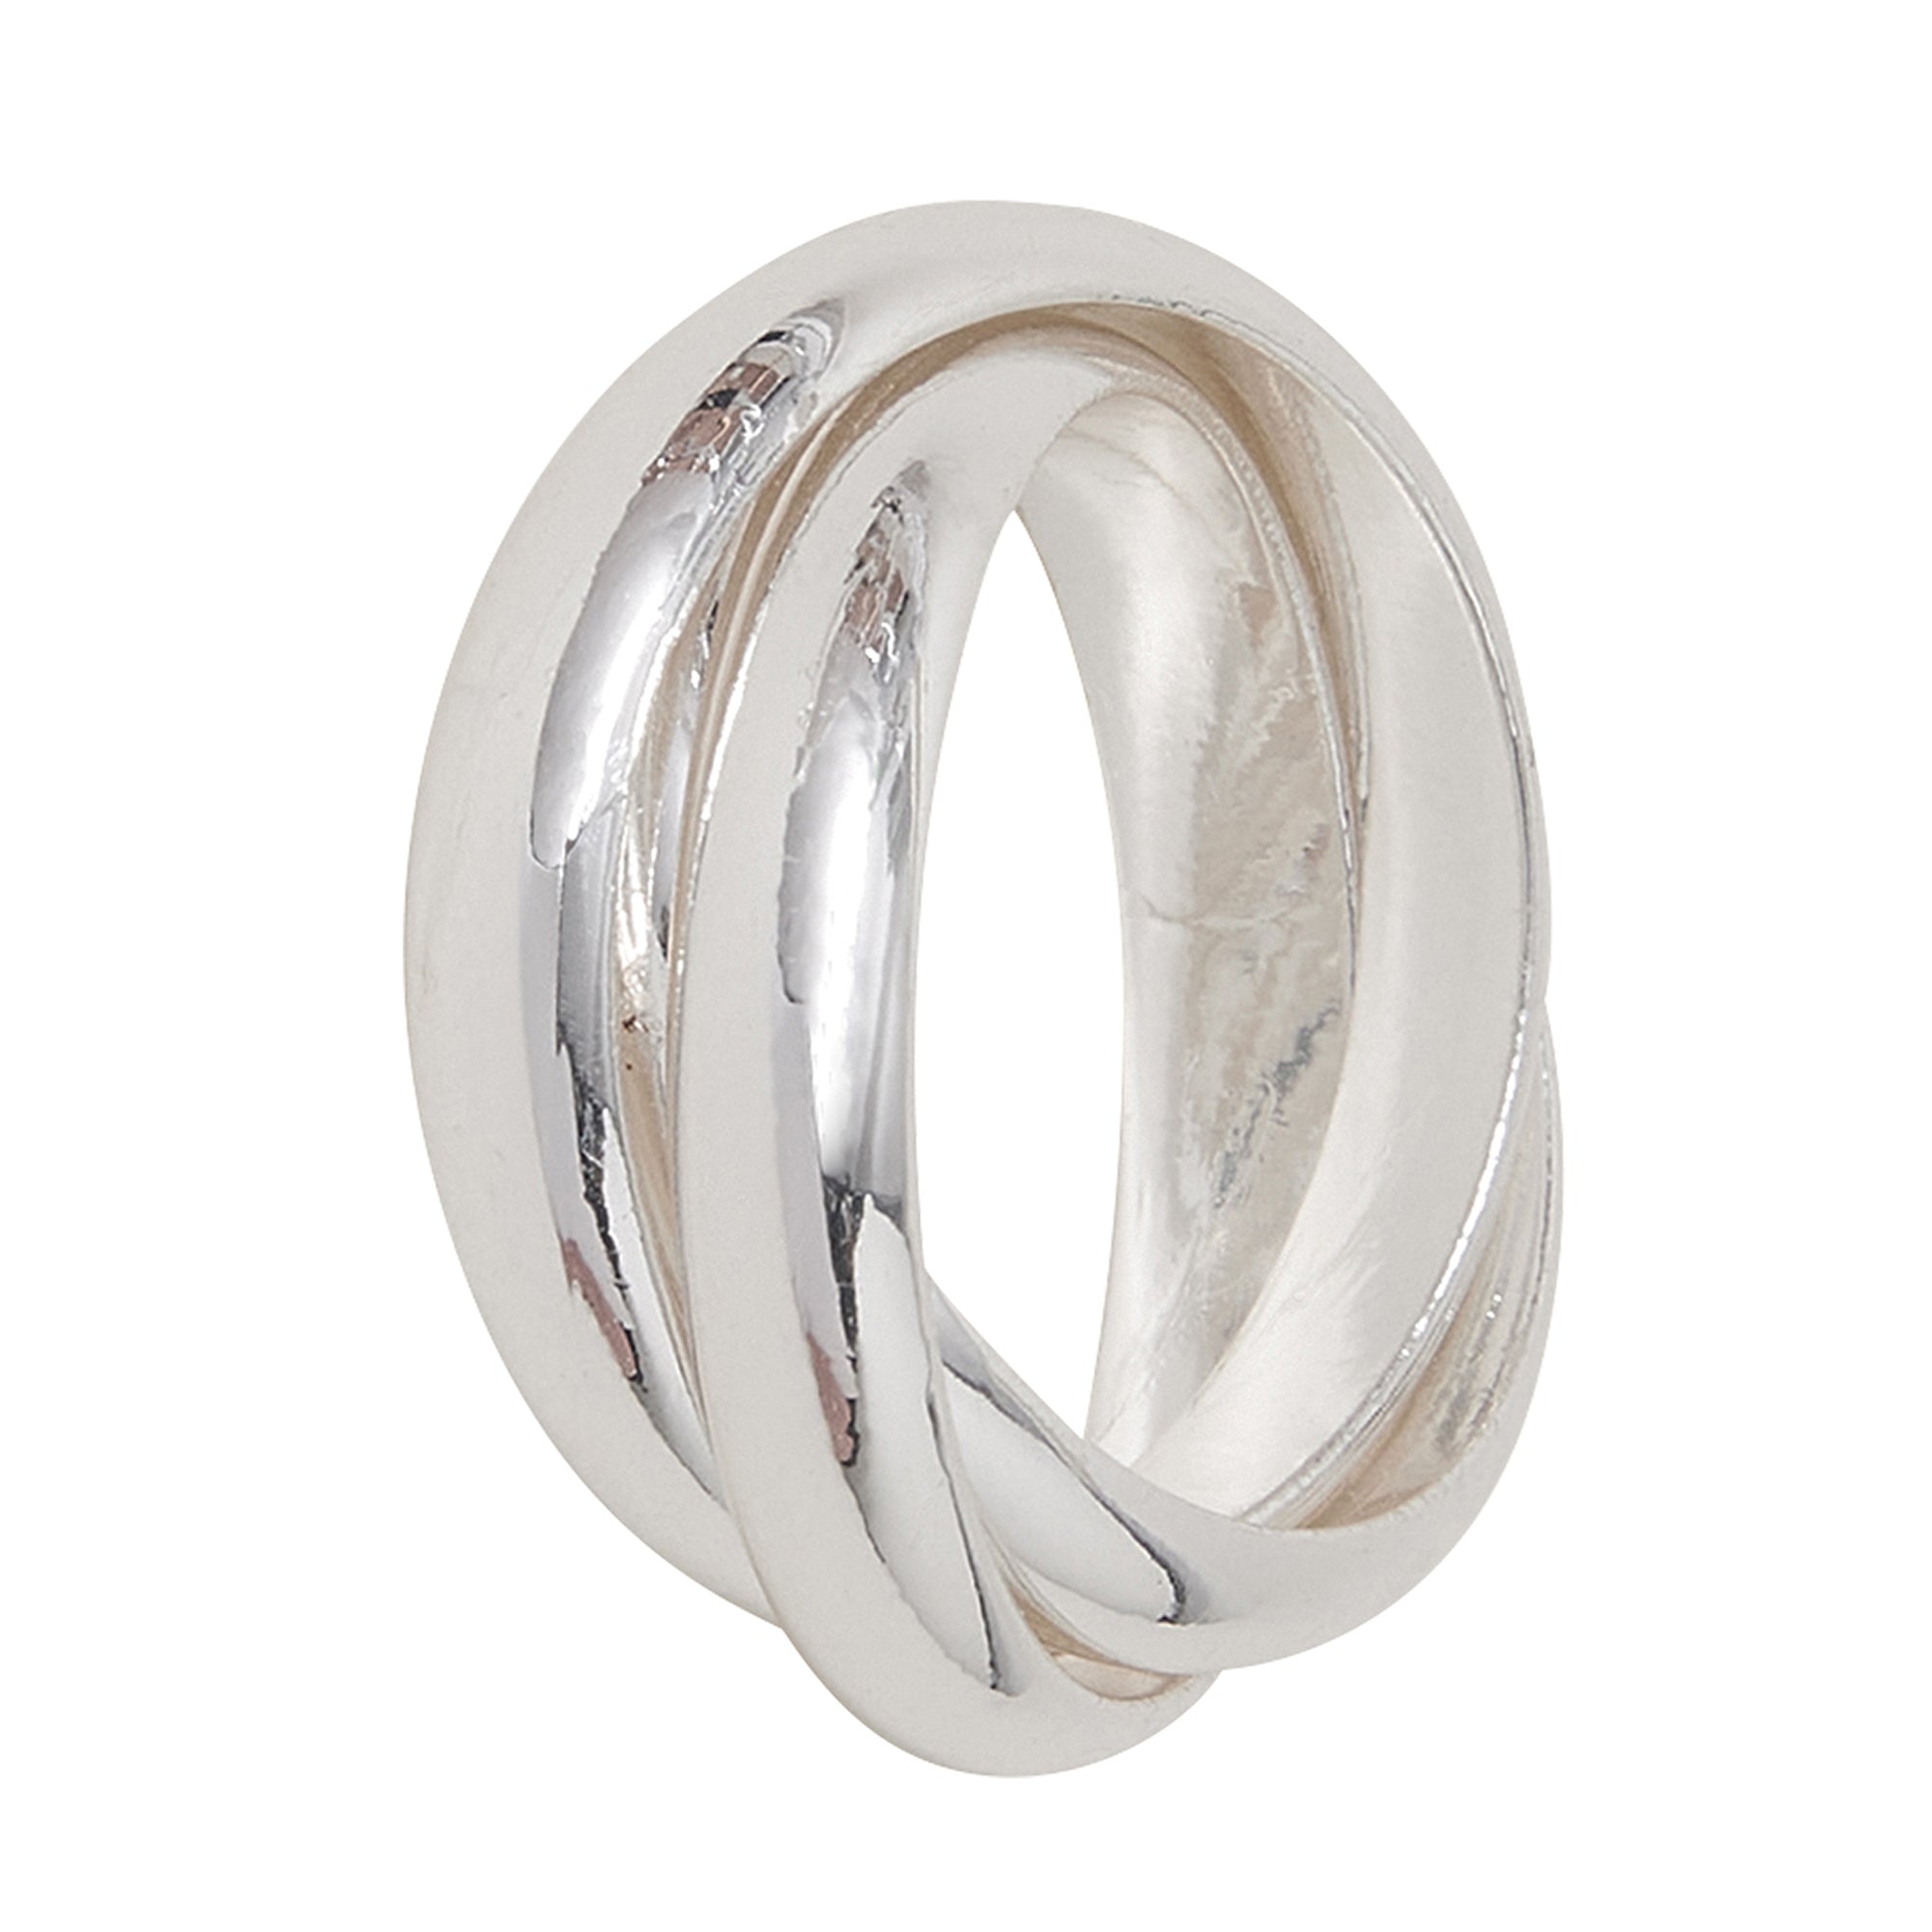 Large Silver Plated Twisted Ring